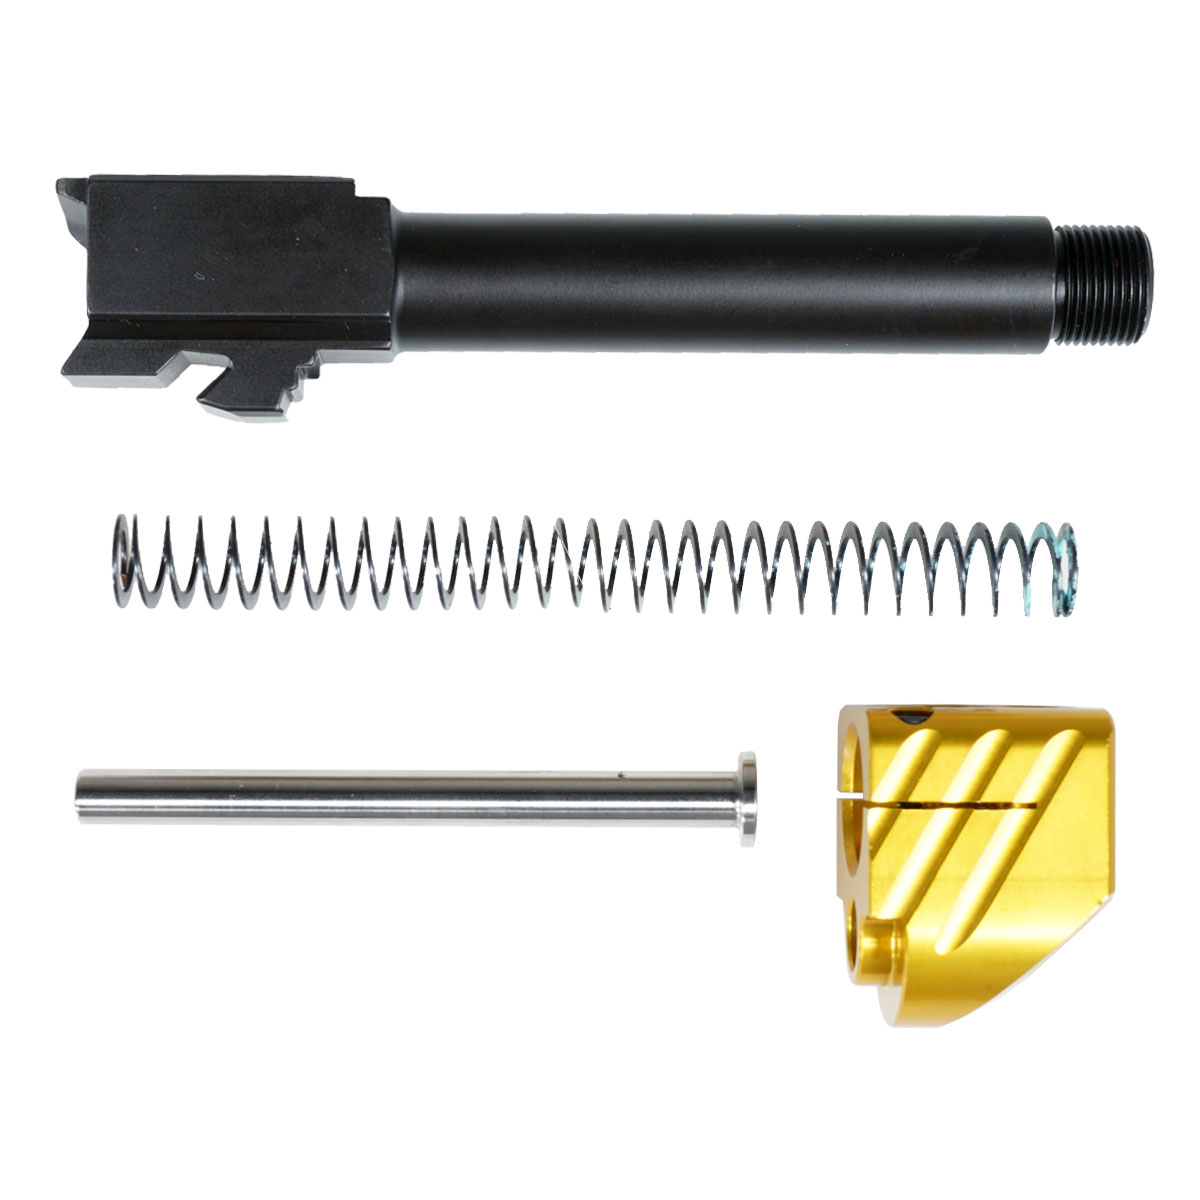 Upgrade Your Glock Kit: Mercury Precision Glock Compensator 6061 Aluminum, Anodized Type 2 Gold Single port comp 1/2x28 with clamping set screws  + ELD Performance Match Grade 9mm Glock 19 Compatible Nitride Melonite 1-16T Threaded Barrel